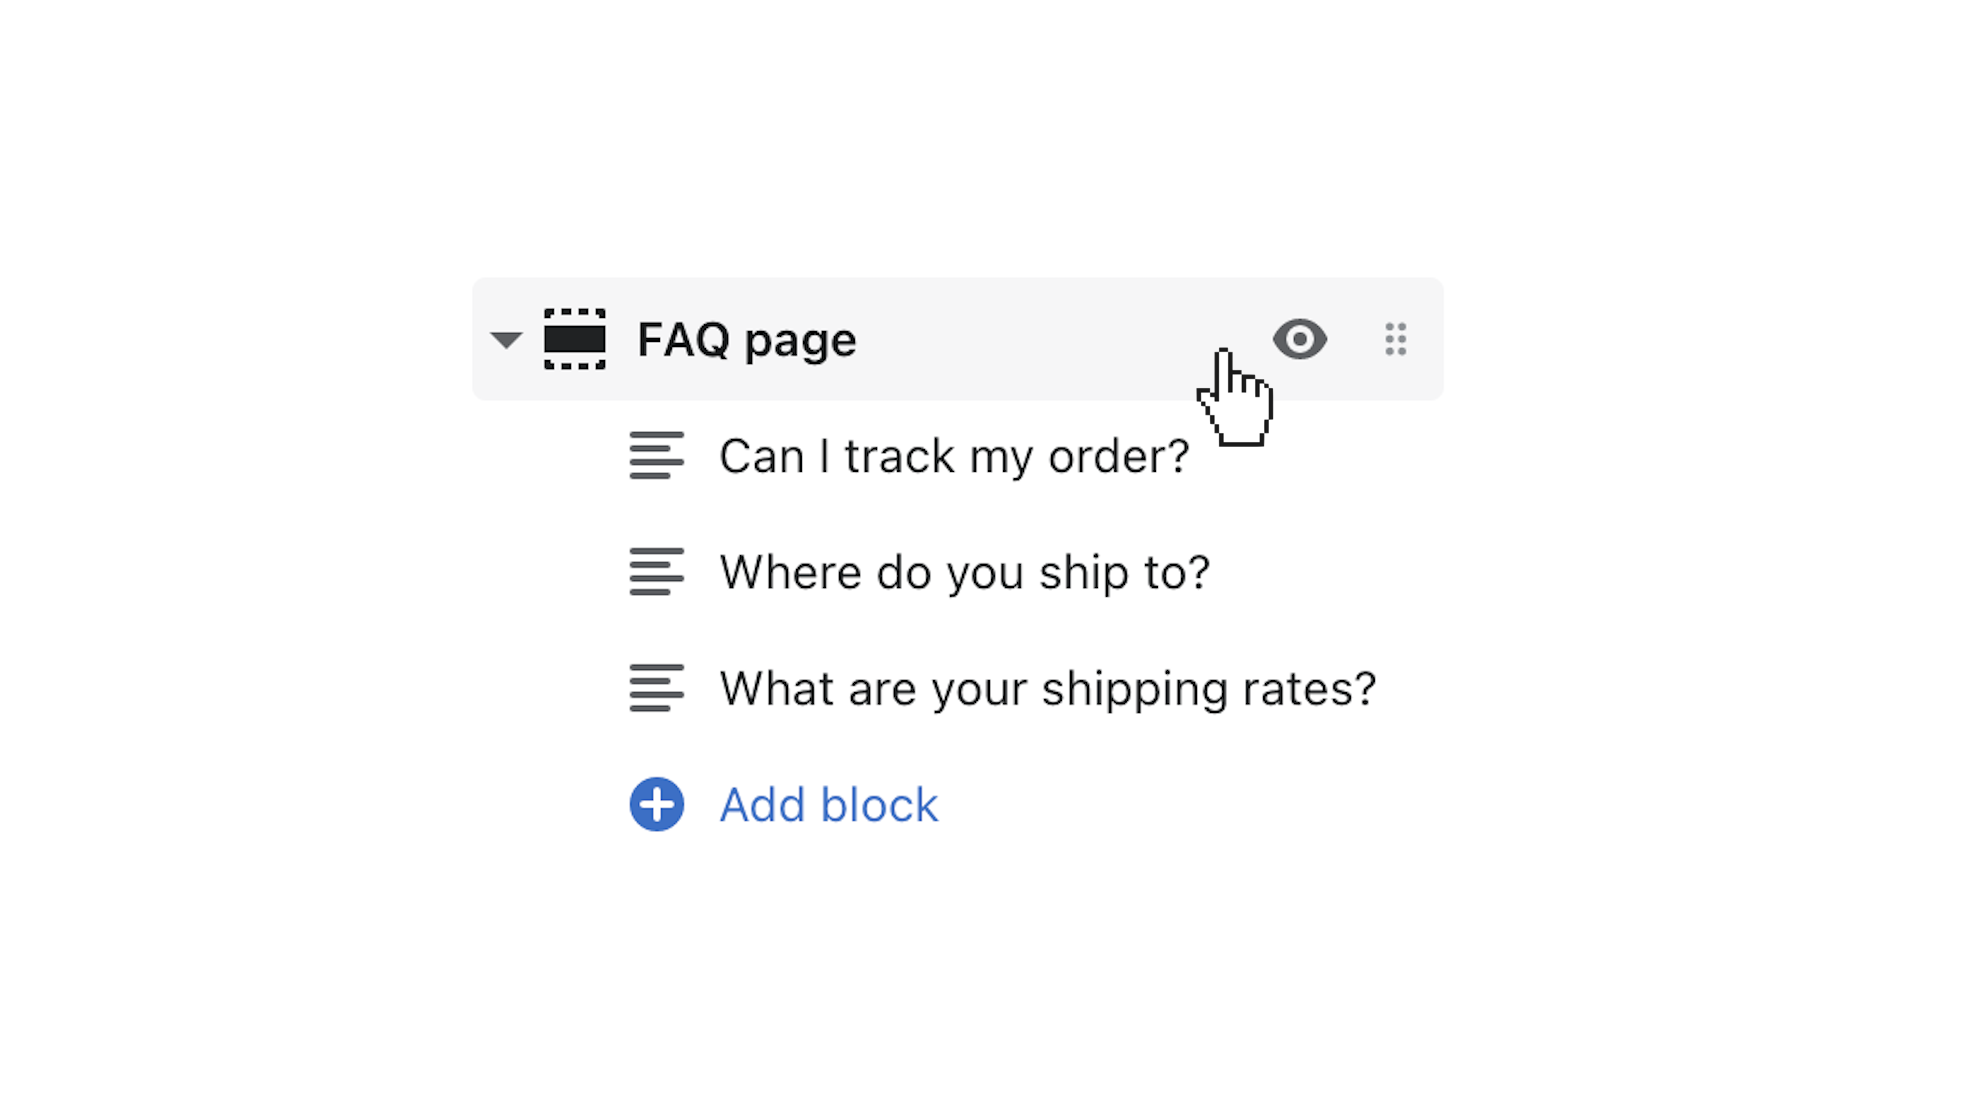 click_the_faq_page_section_to_customize_tha_background_color.png